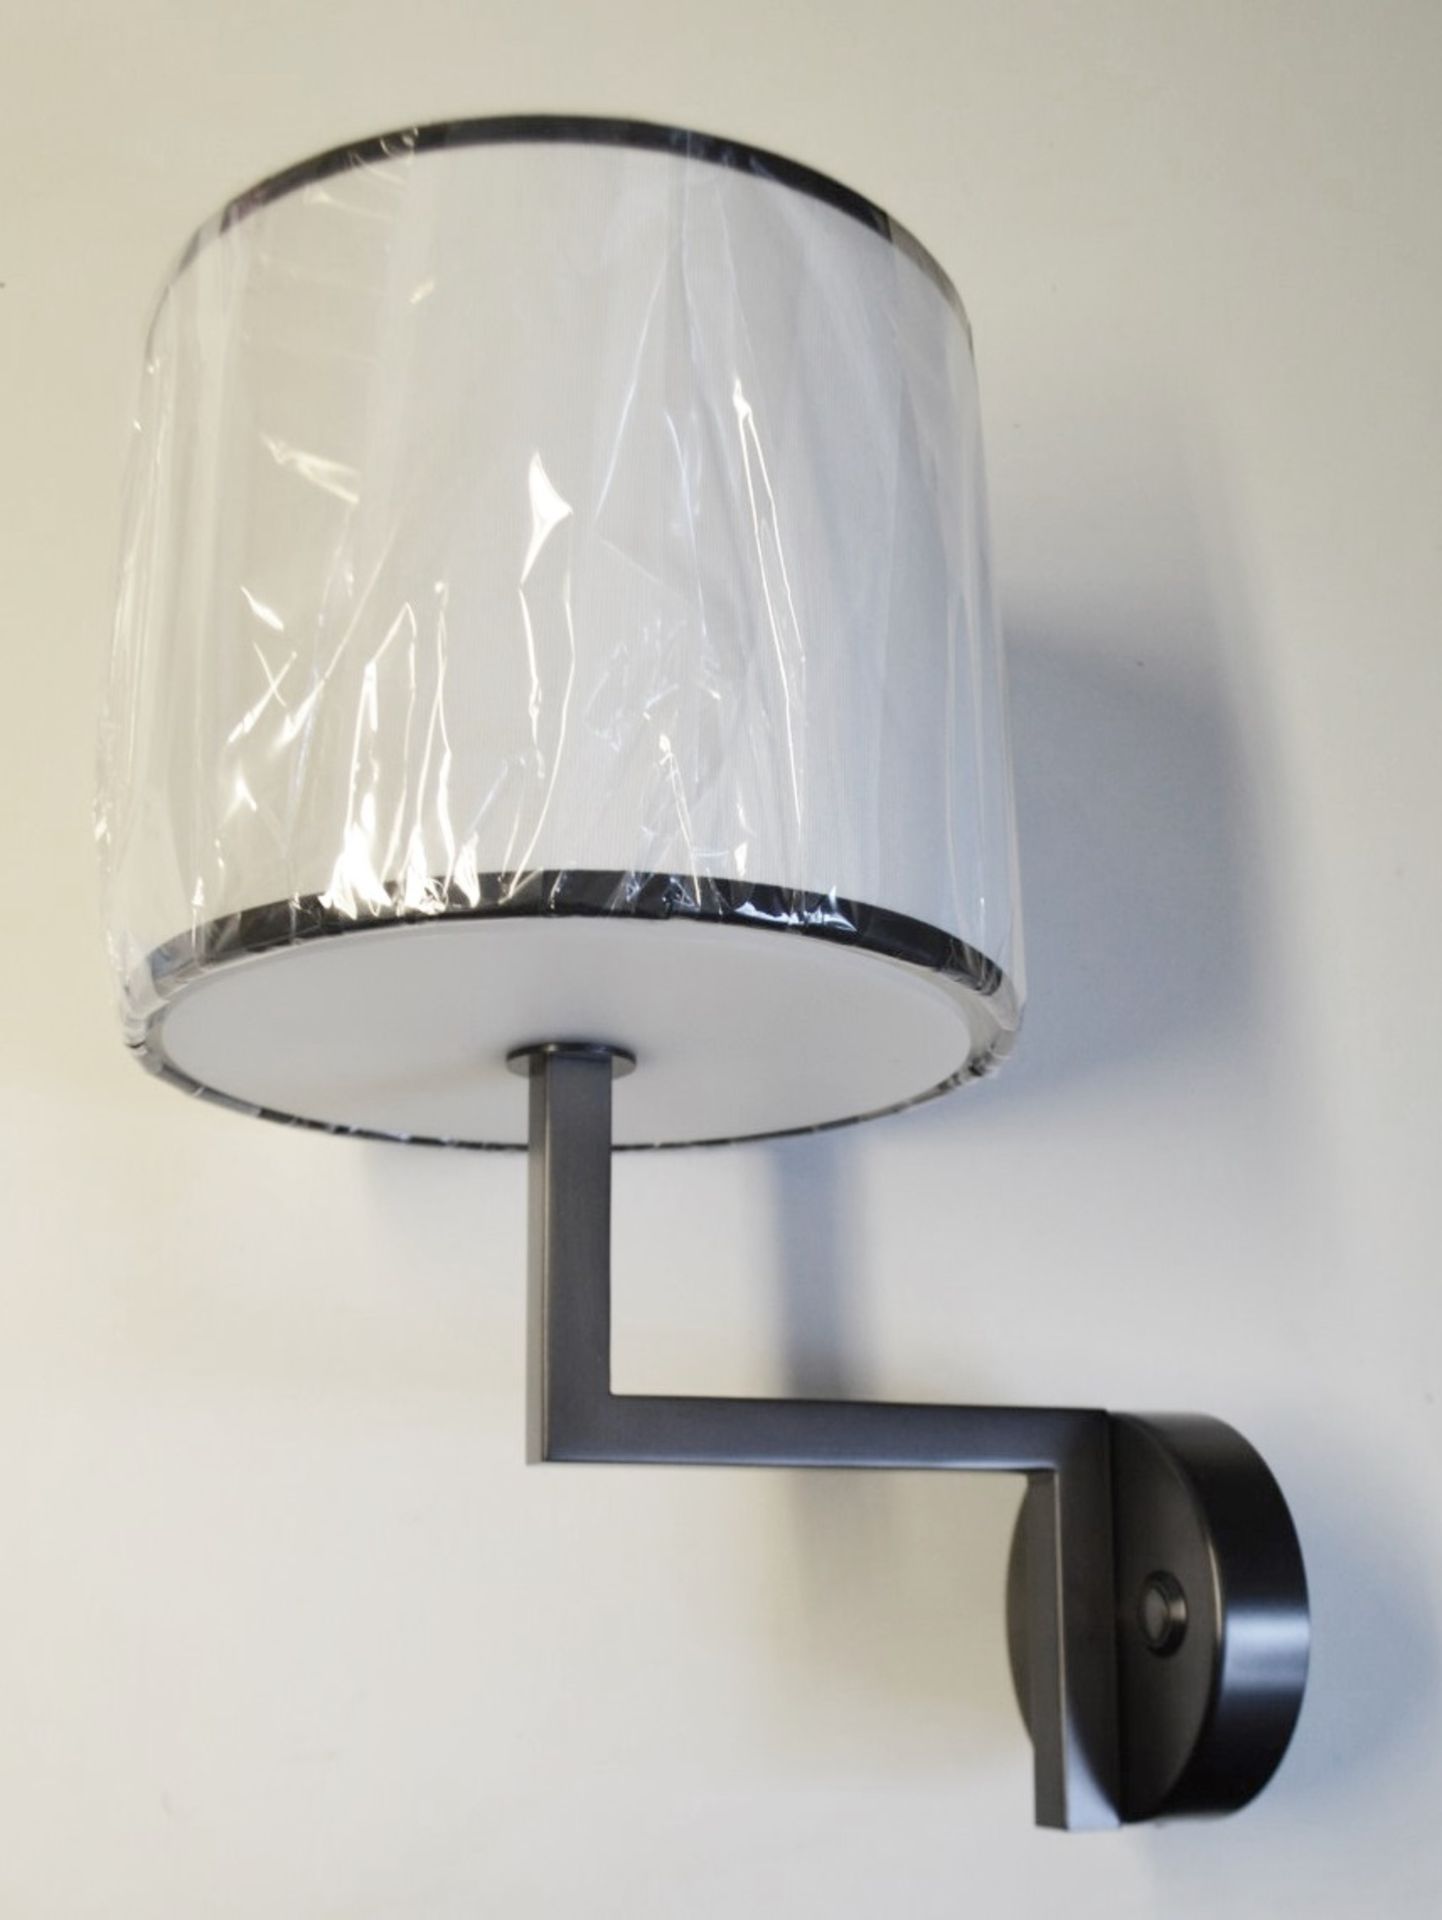 1 x CHELSOM Art Deco-style Wall Light In A Black Bronze Finish With White & Black Shade With Acrylic